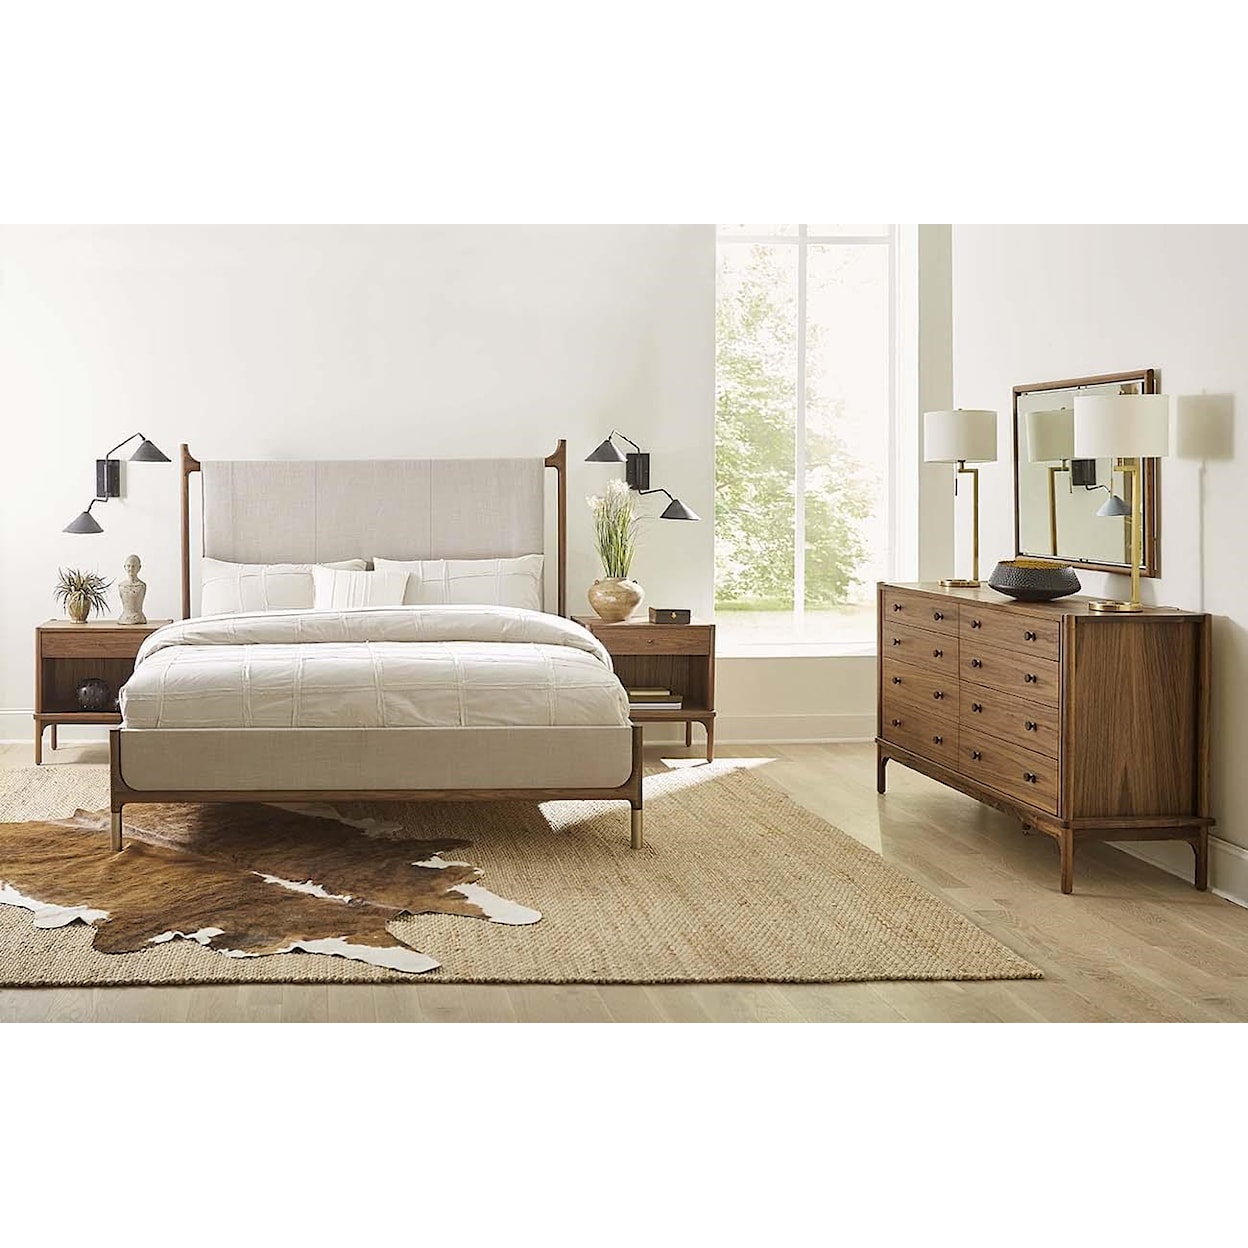 Stickley Walnut Grove King Leather Upholstered Bed